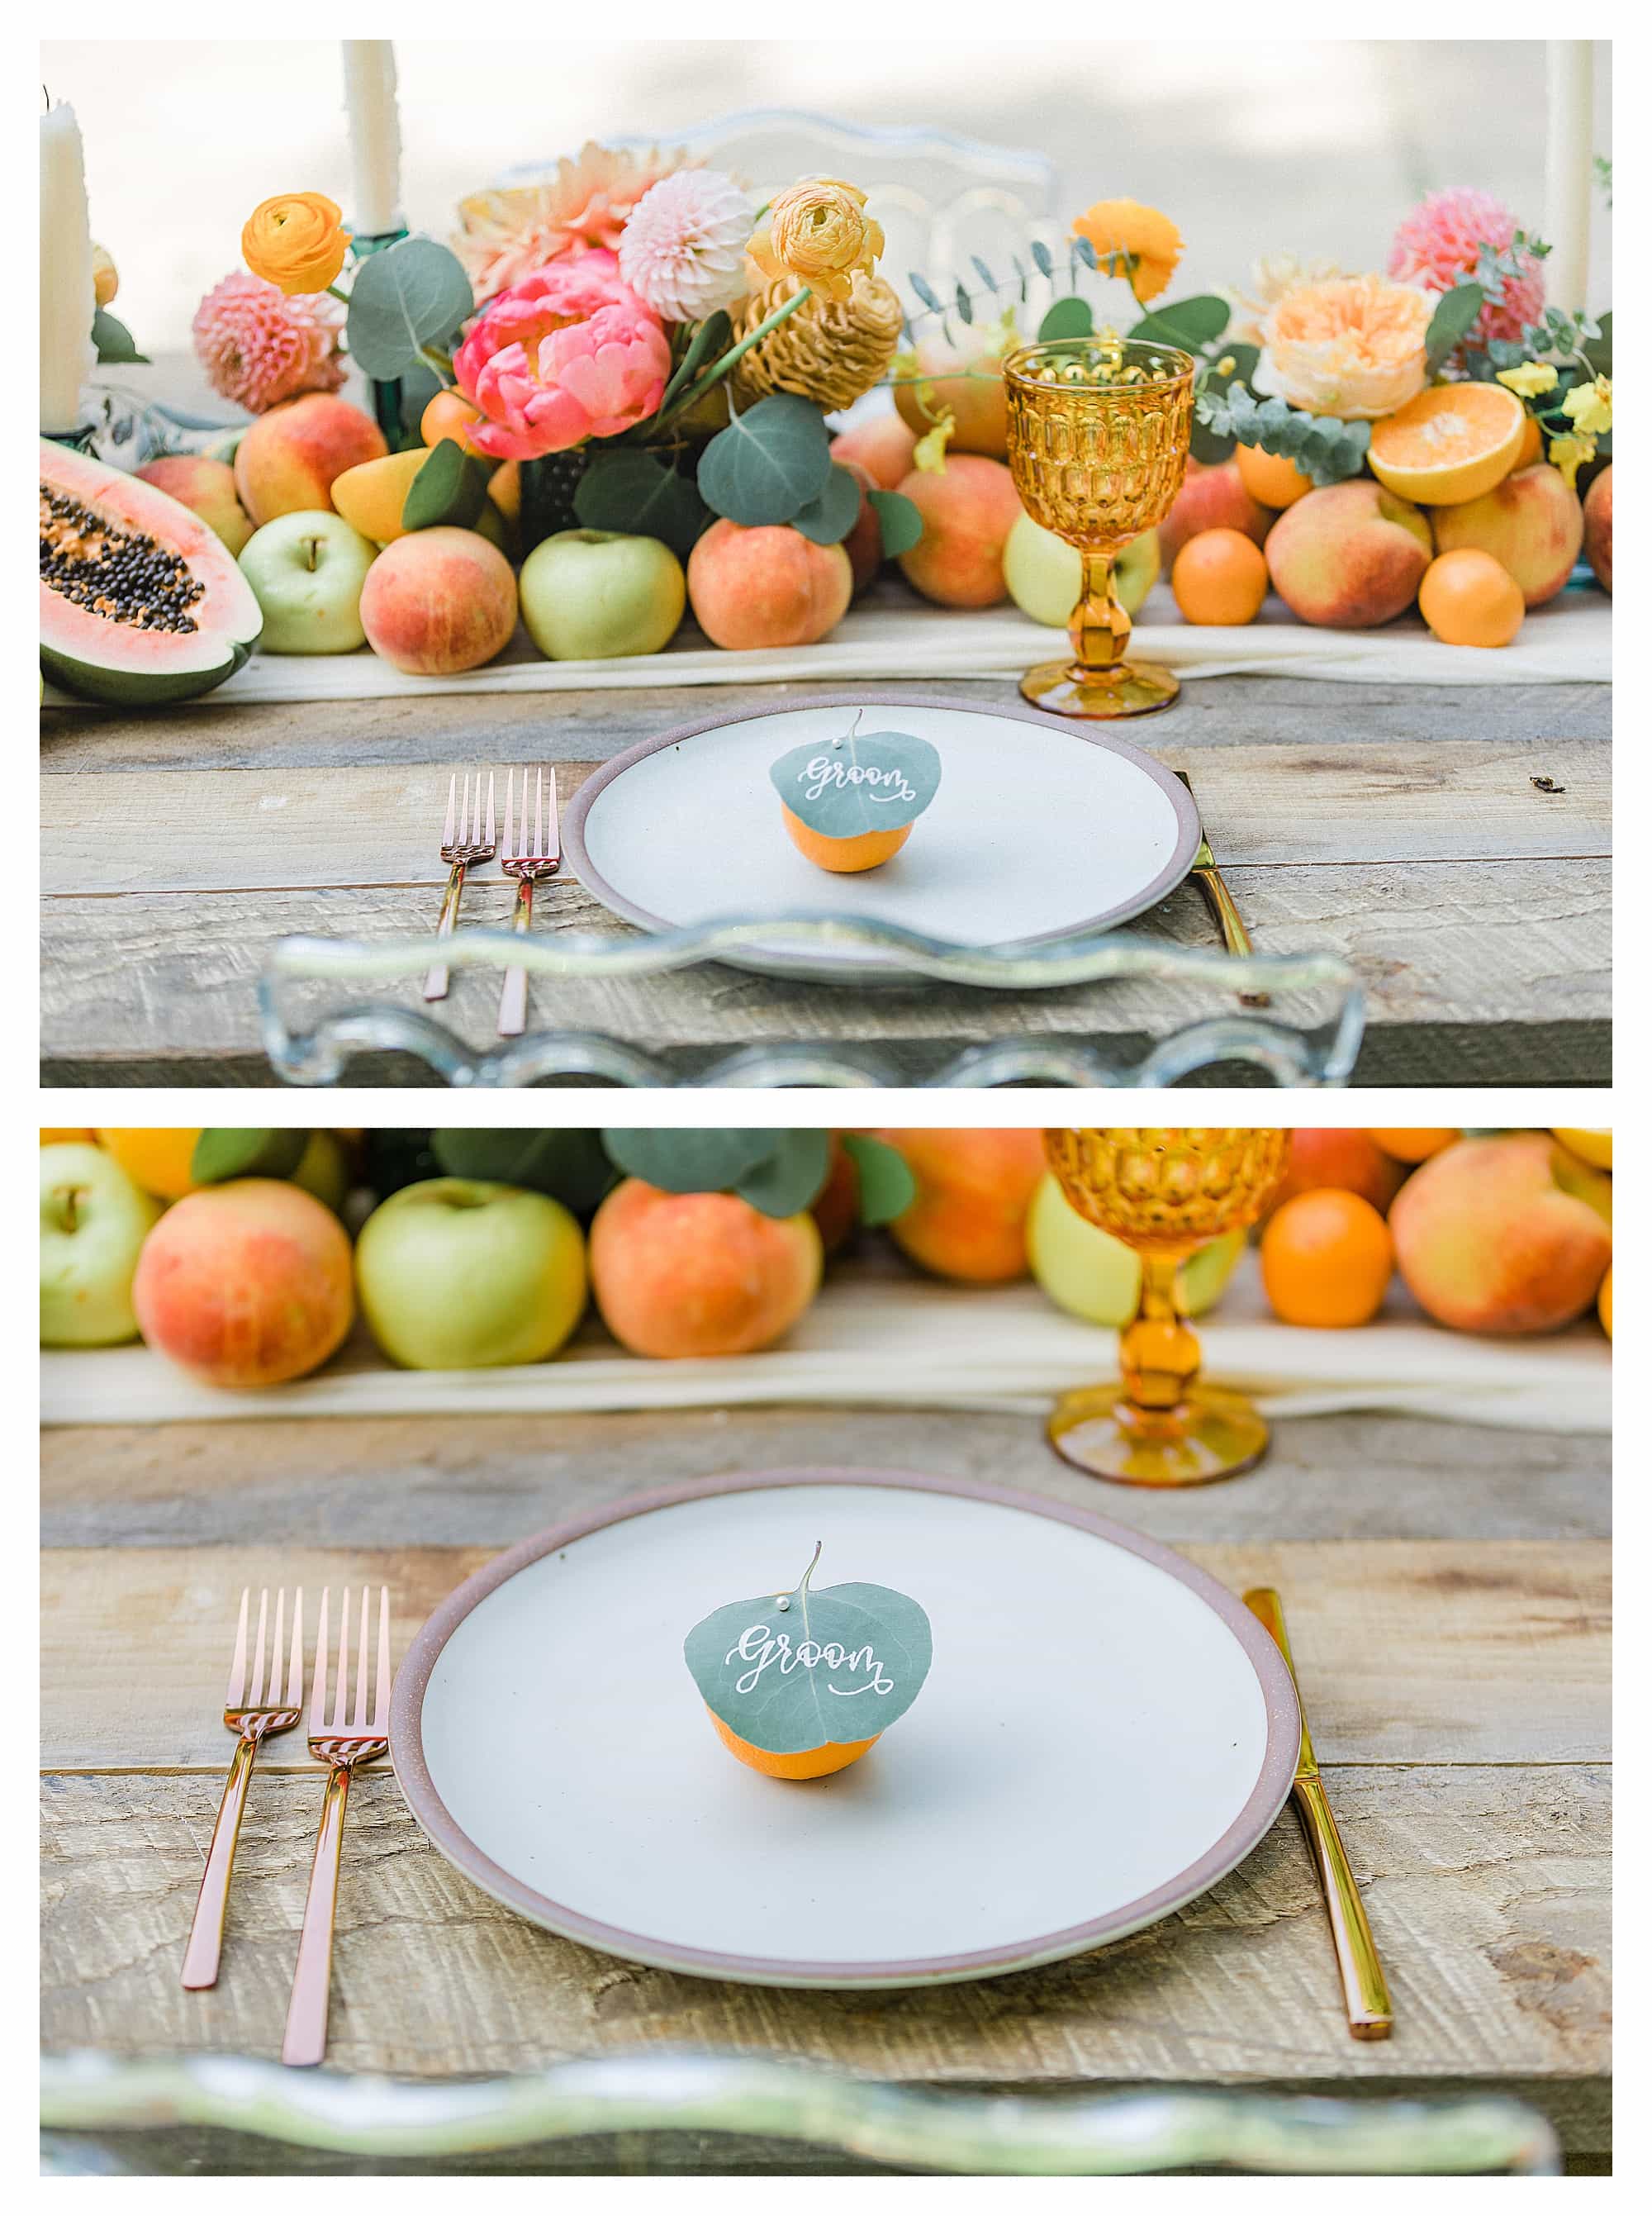 small orange with leaf pinned in it for place cards sitting on white place